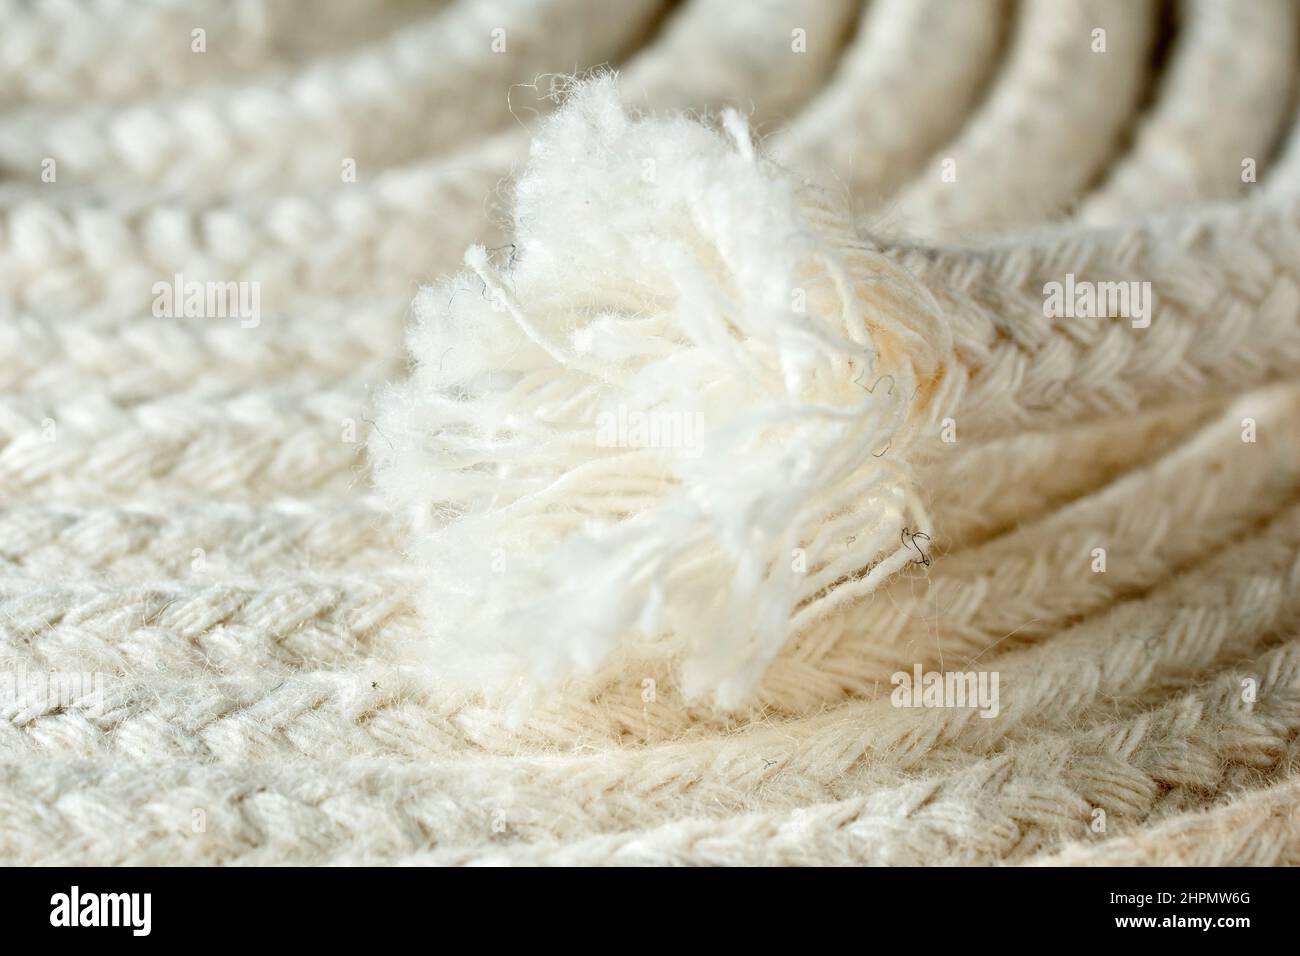 Close up of the frayed end of a thin white cotton rope commonly used in the UK for hanging clothes outside to dry. Stock Photo